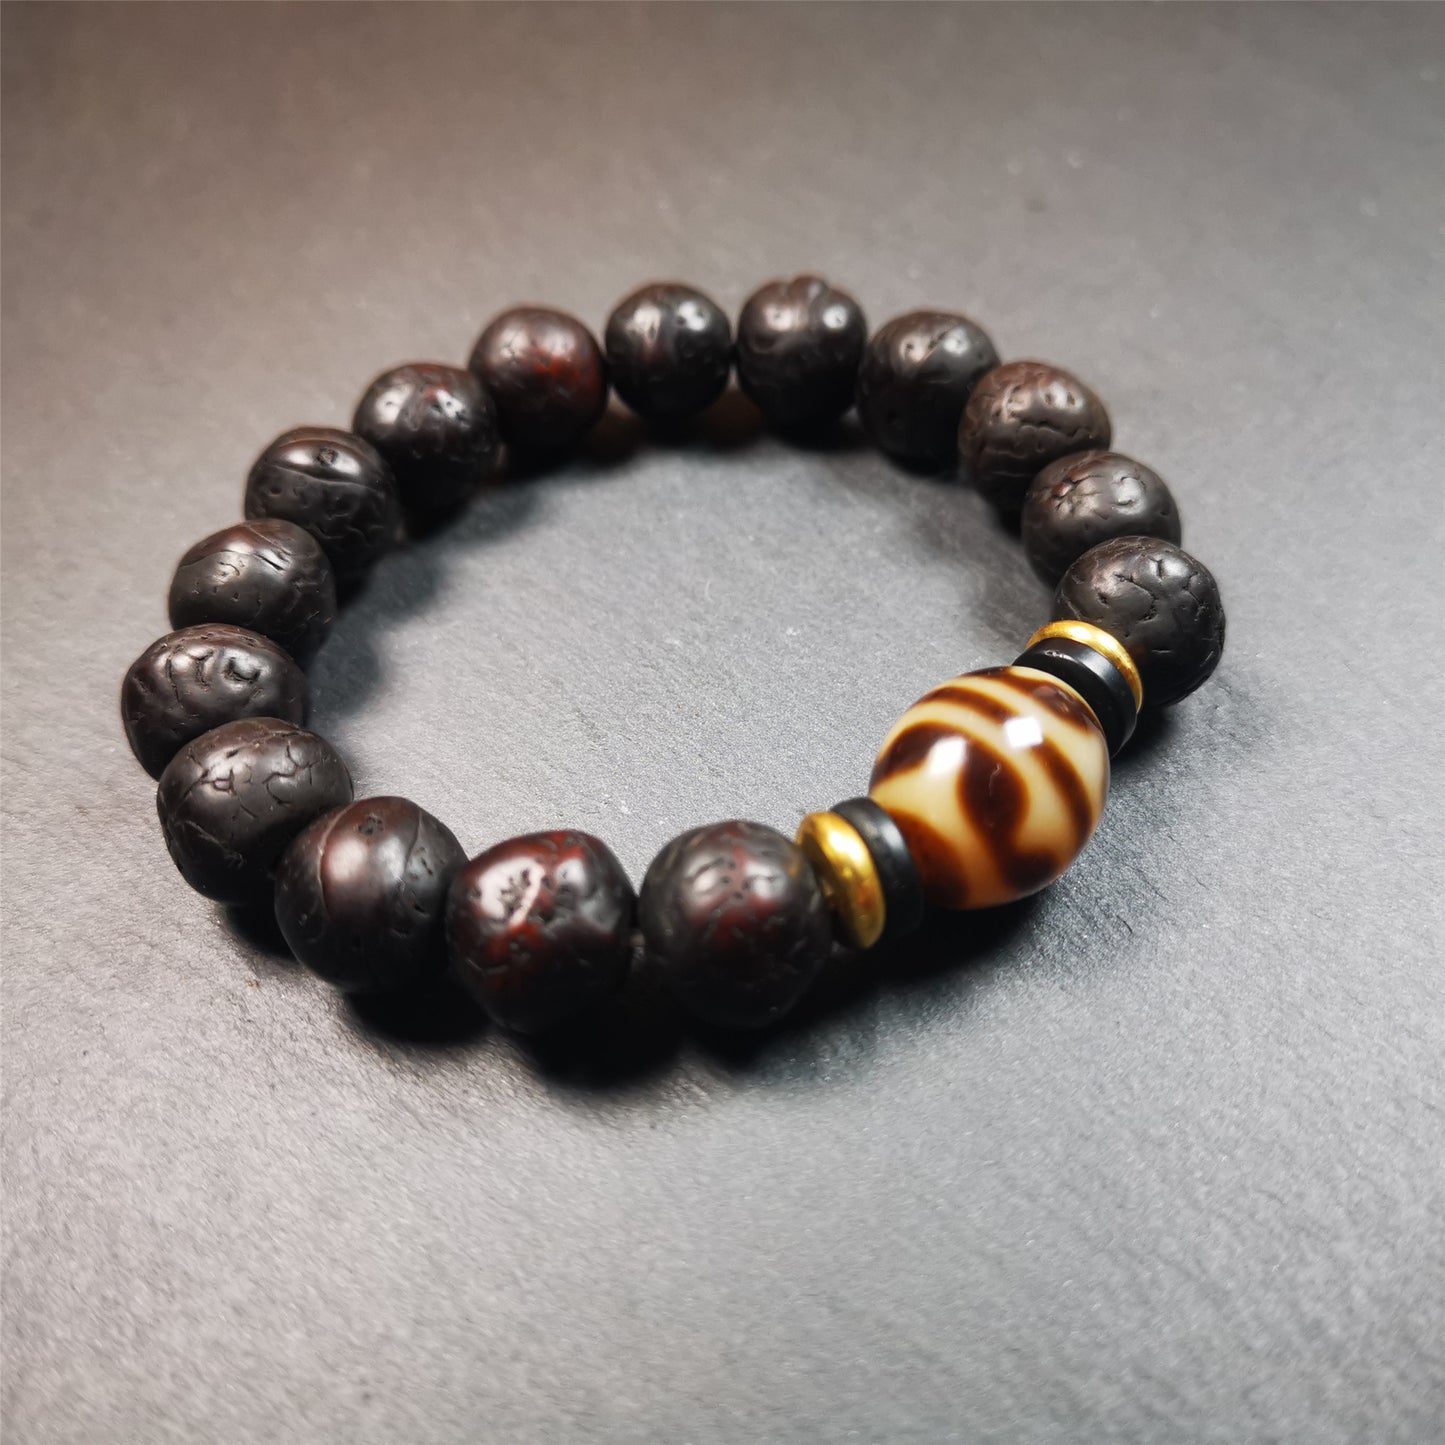 This unique Dalo Dzi bracelet is made up of one tiger tooth Dalo Dzi and 15 old bodhi seed beads. It is brown in color and has a circumference of approximately 7 inches, is suitable for most wrist sizes.  This bracelet combines the mysterious and unique qualities of the tiger tooth Dalo Dzi and the bodhi seed beads, giving it a distinct feel. 